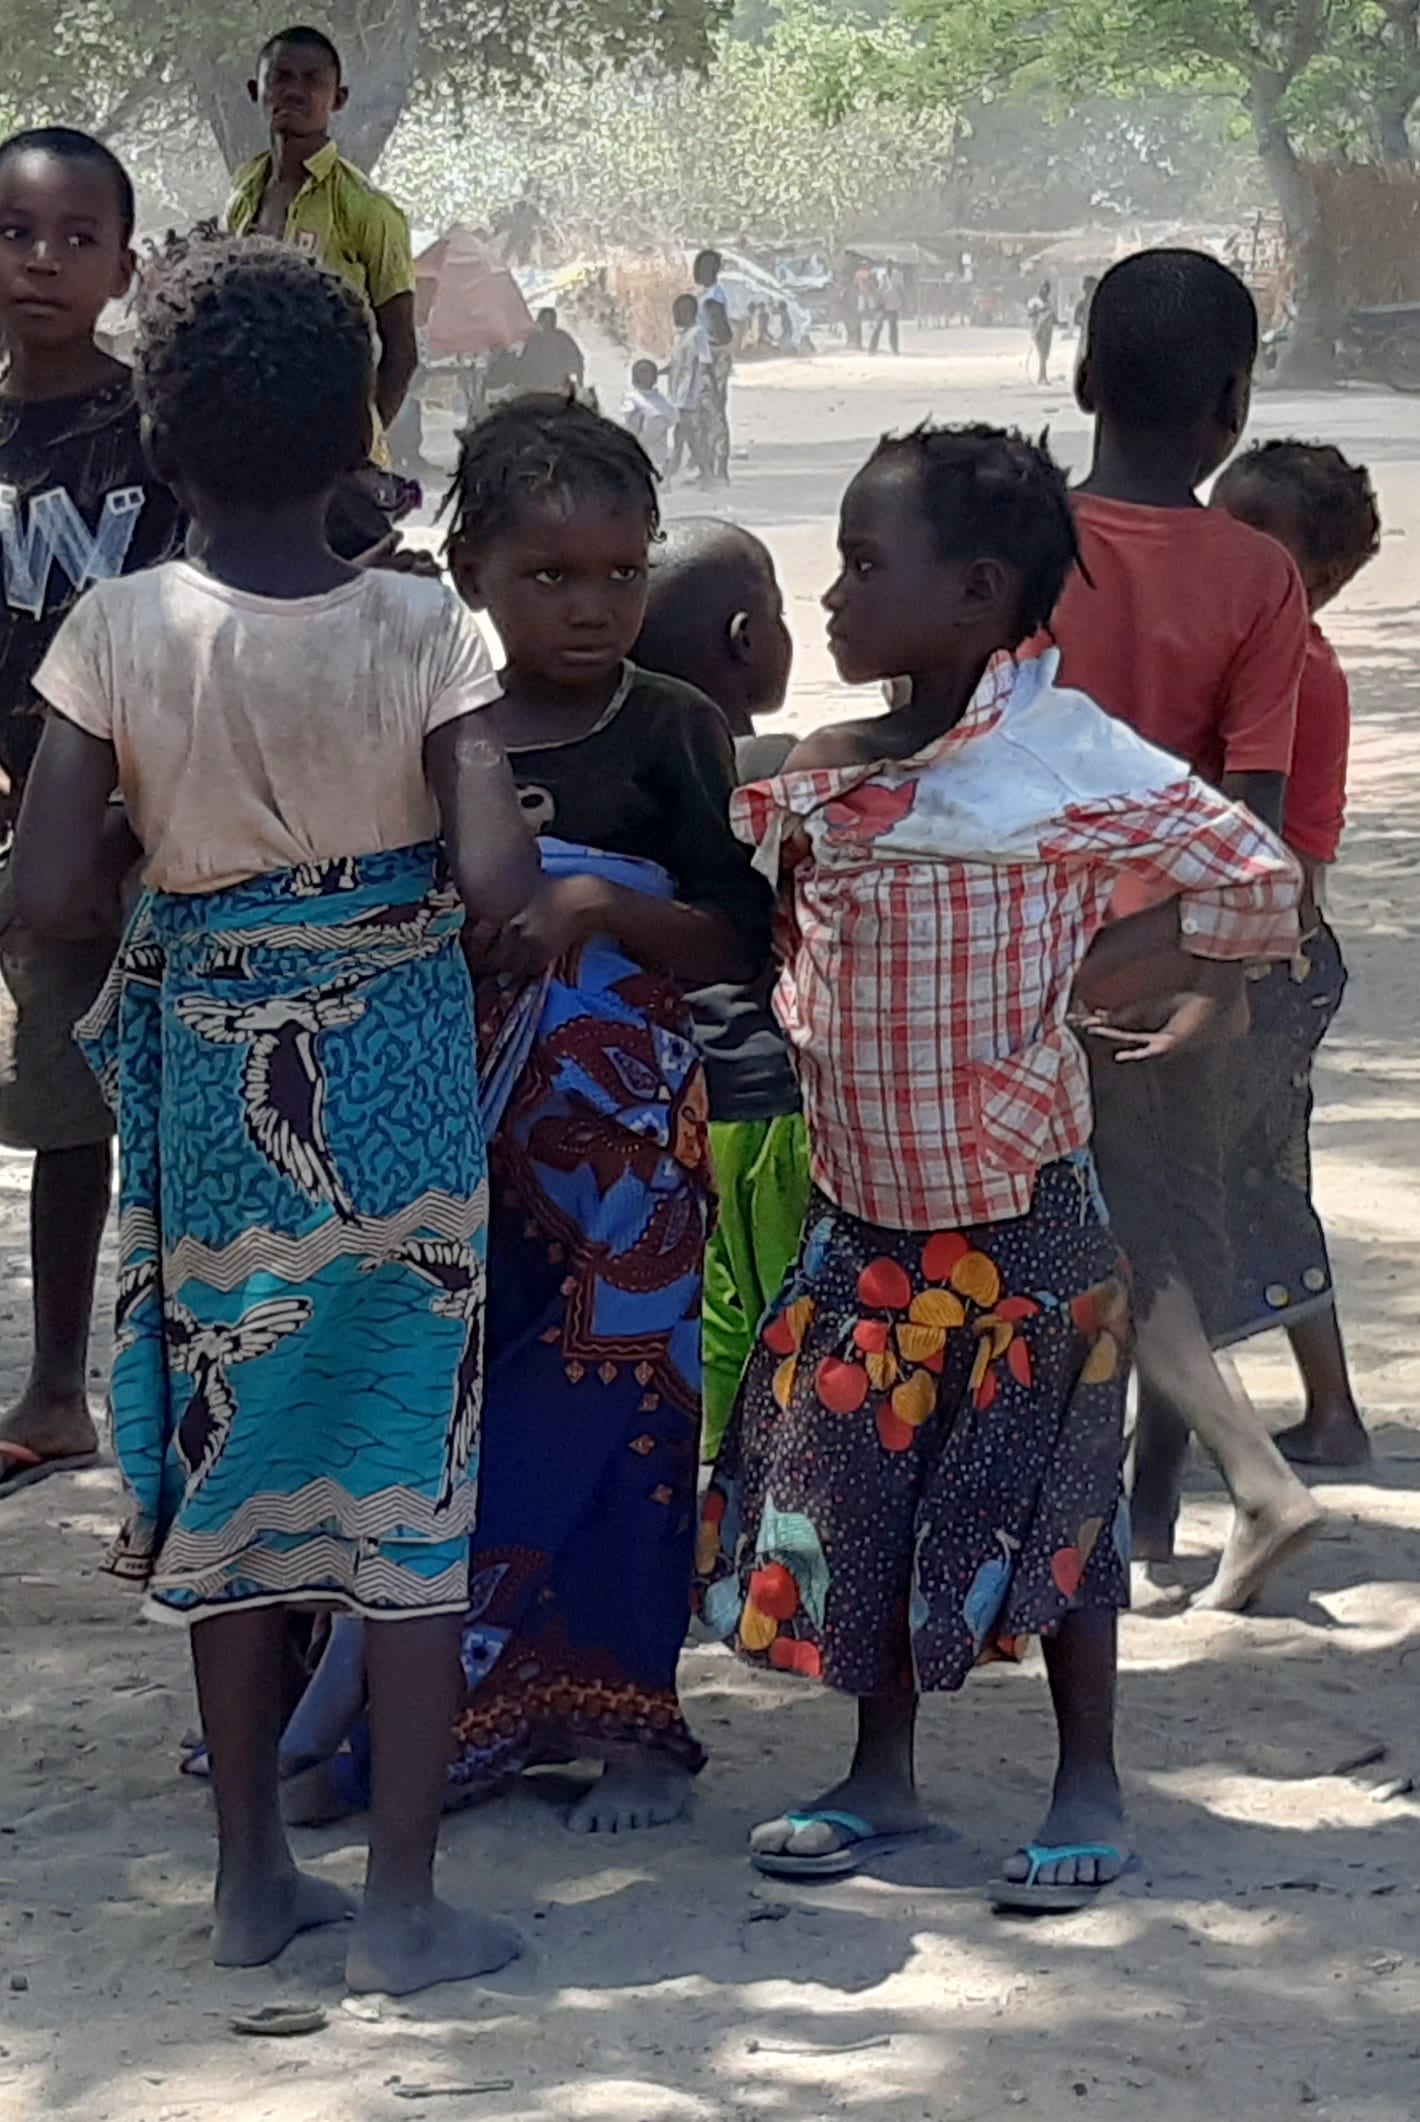 Situation in the refugee settlements in the diocese of Pemba - Mozambique December 2020